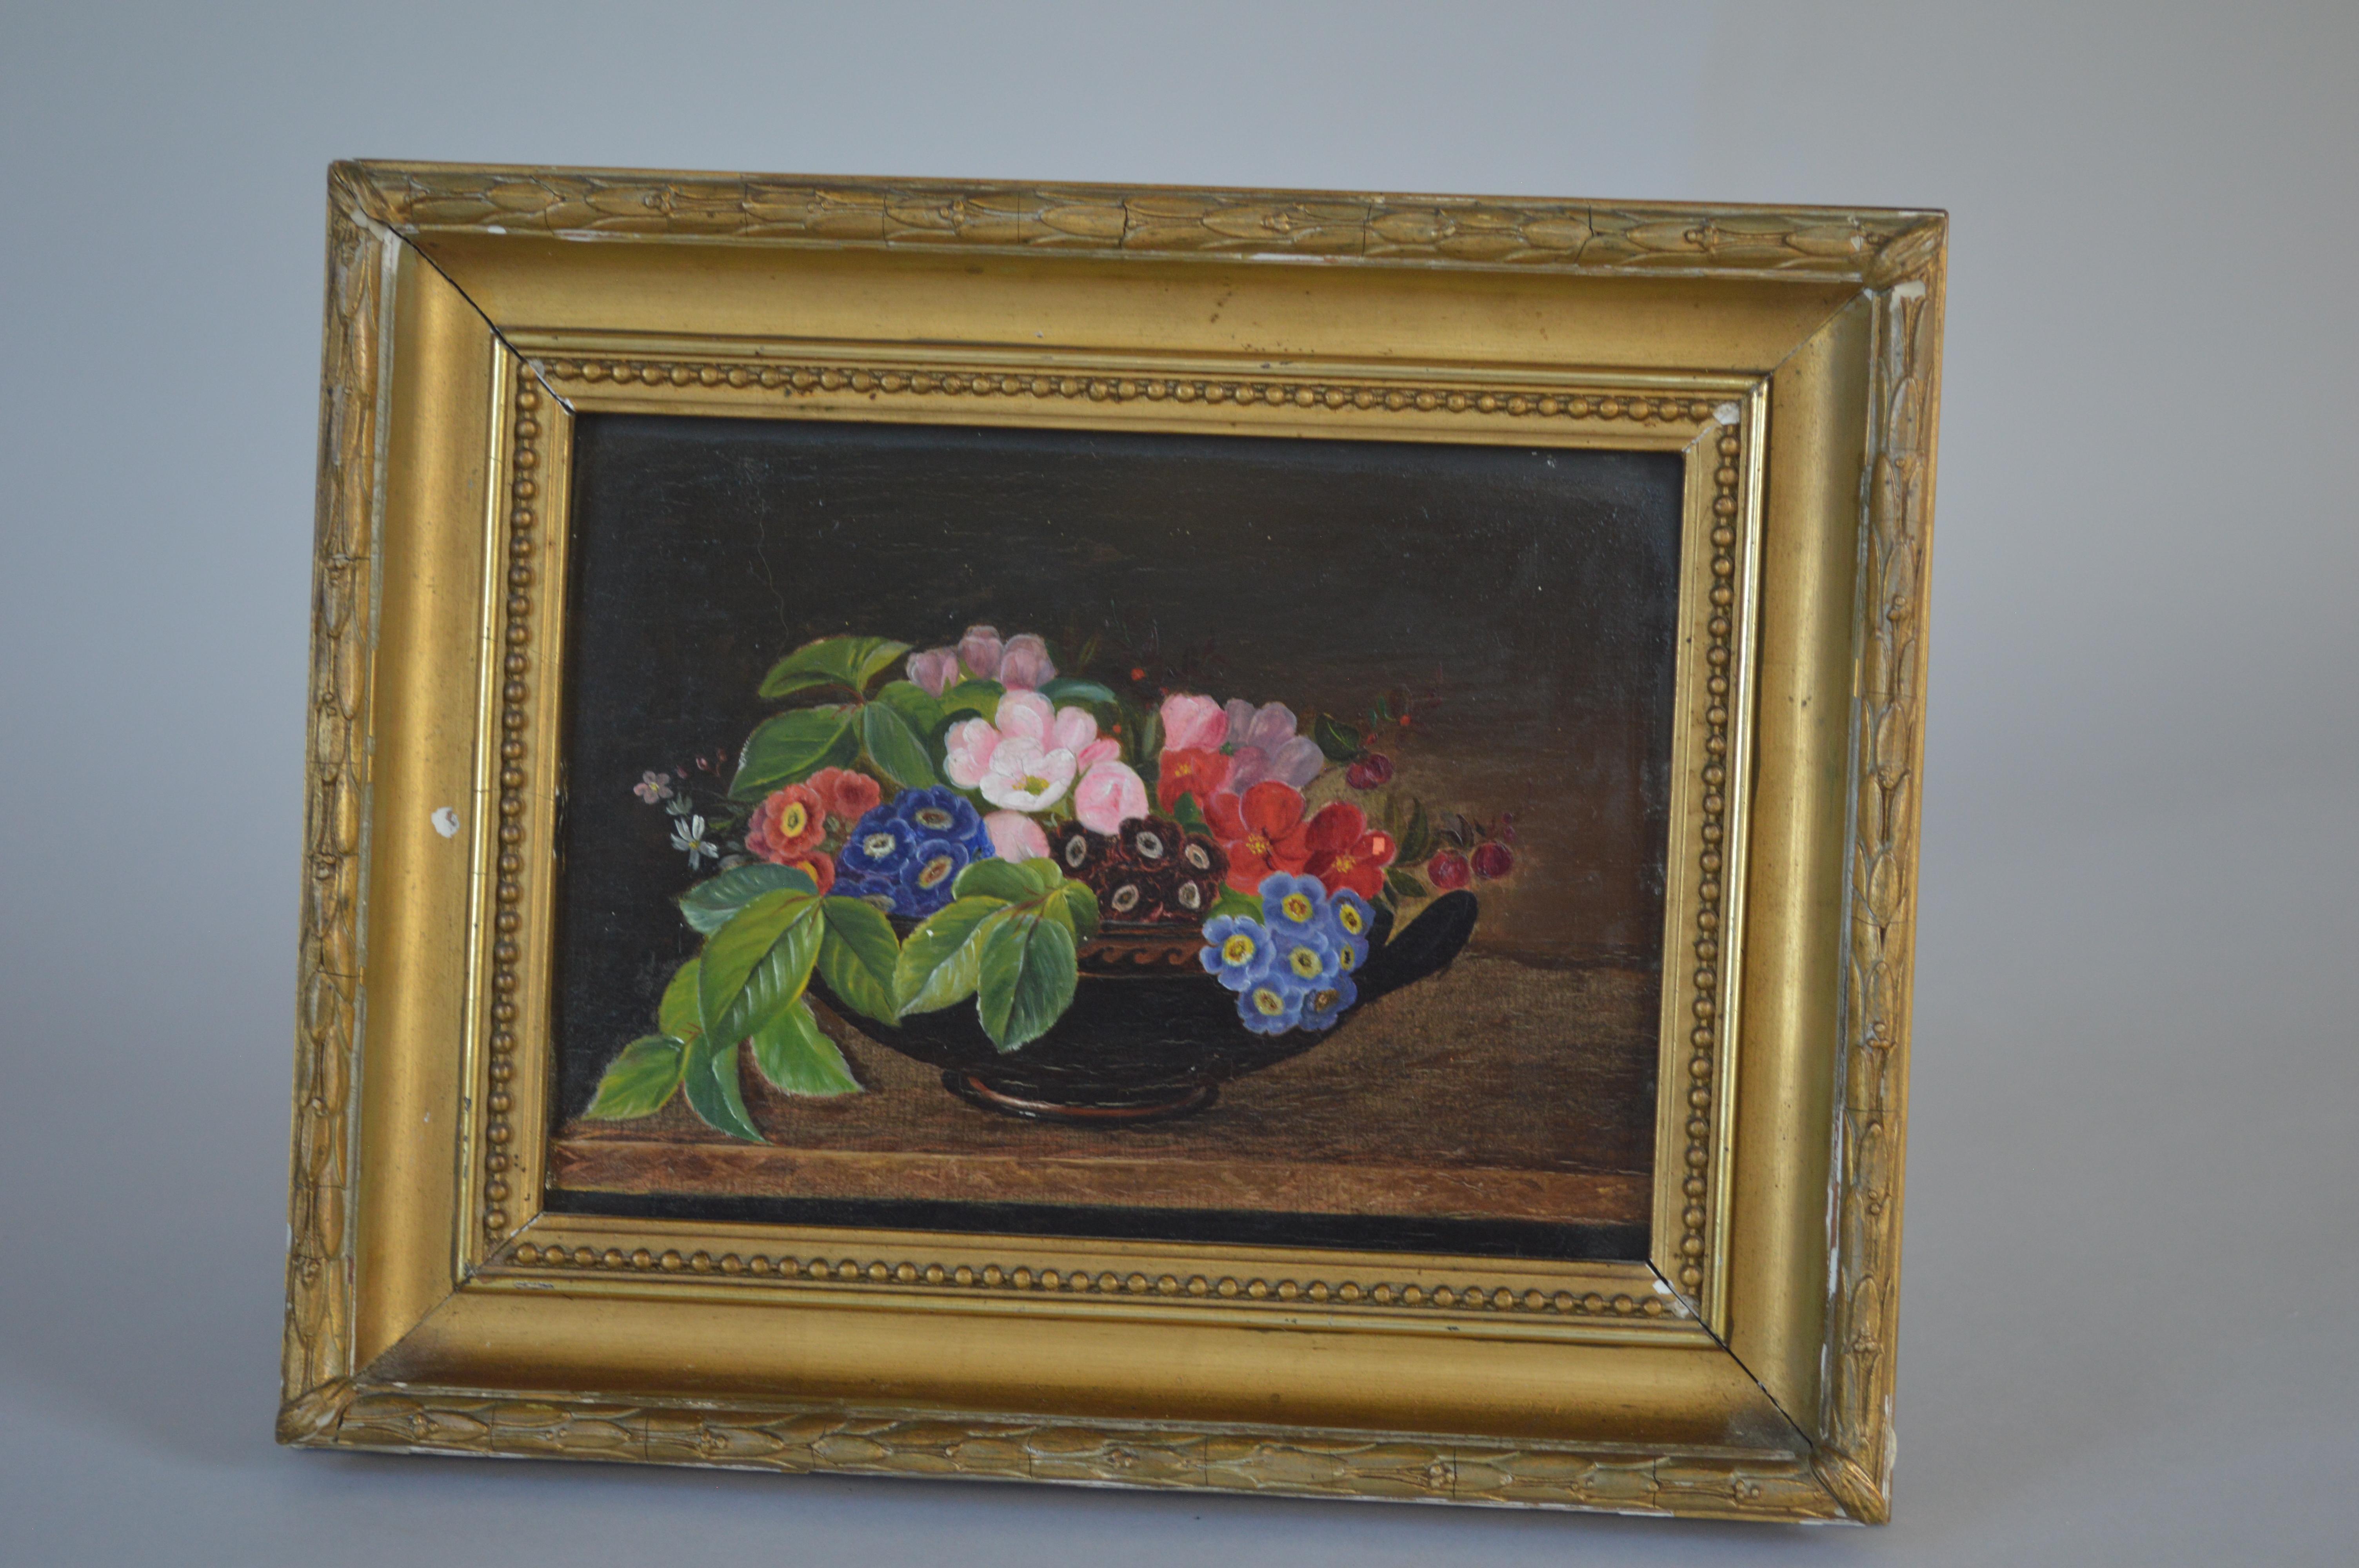 Painted 19th Century Danish Golden Age Flower Painting For Sale